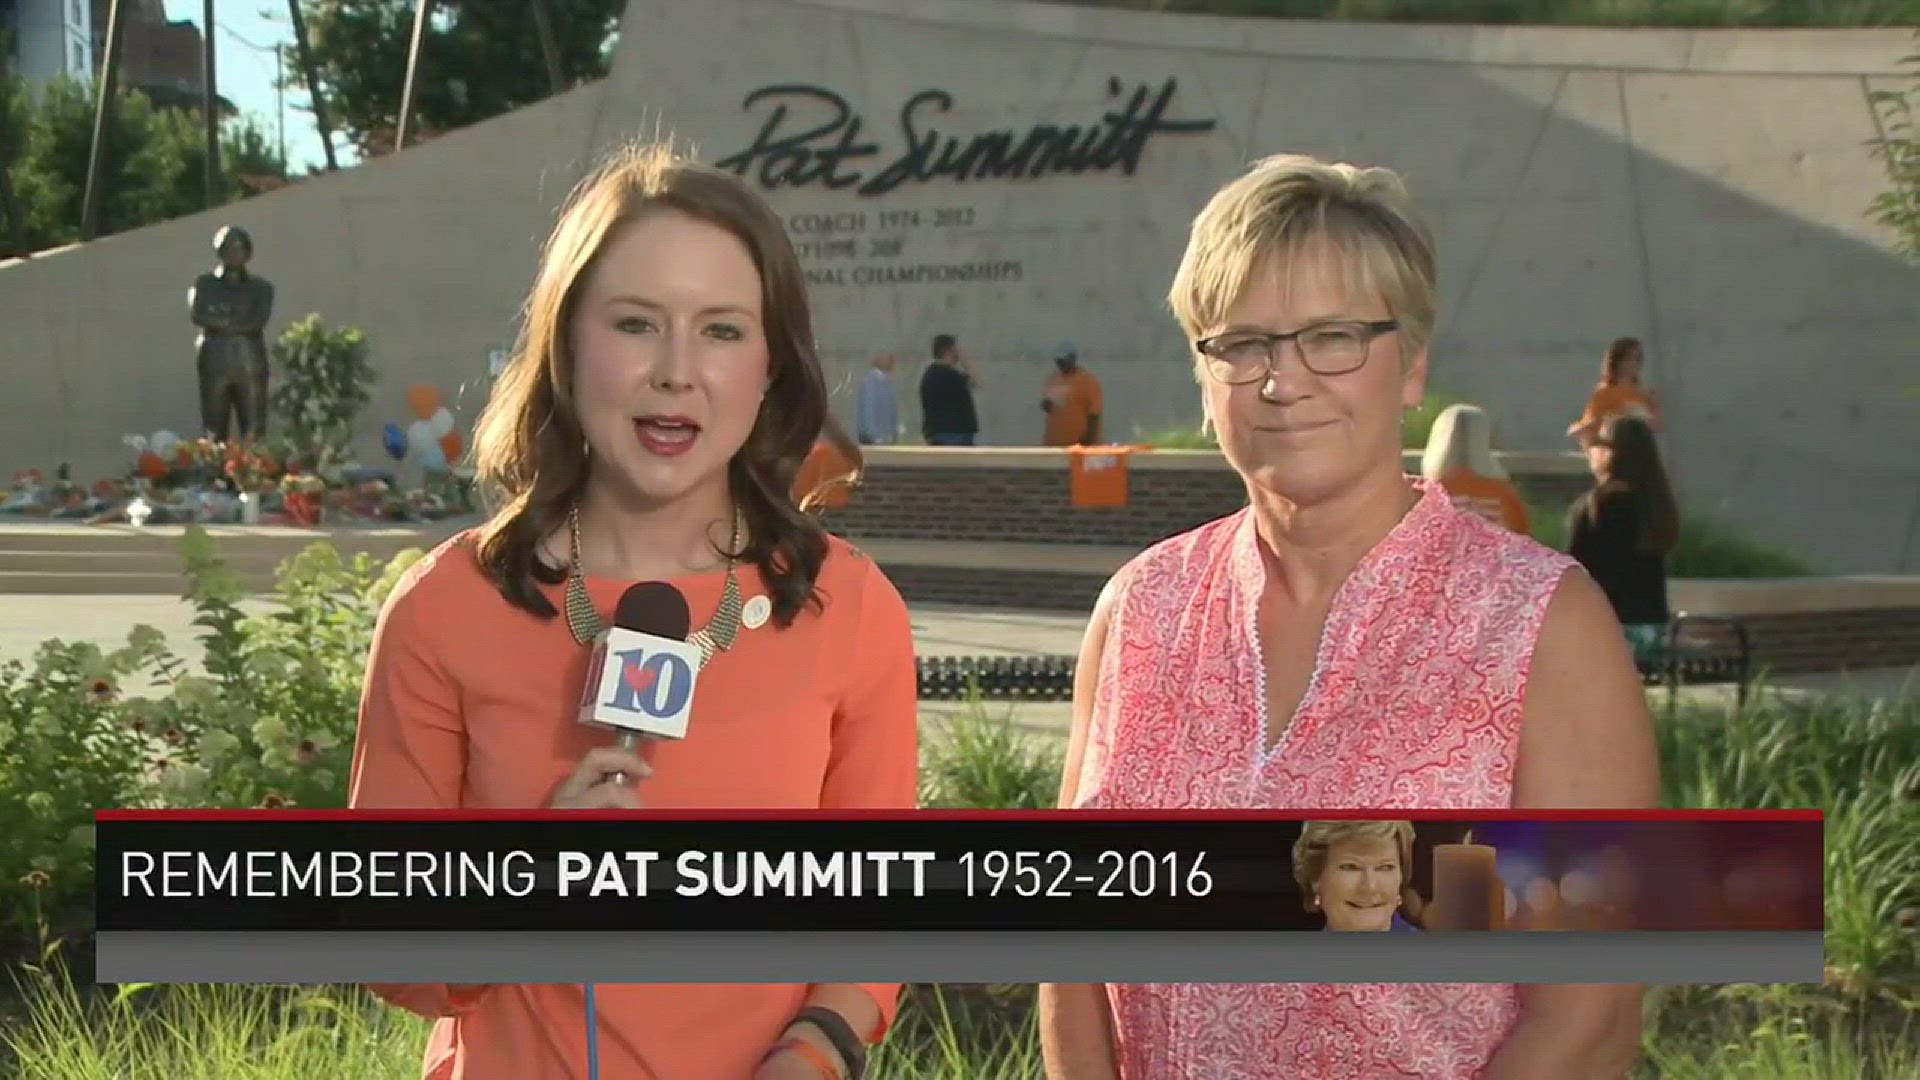 One of Pat Summitt's closest friends Holly Warlick joined WBIR's Courtney Lyle for a live interview on Tuesday evening, sharing her thoughts on the passing of her coach and friend.